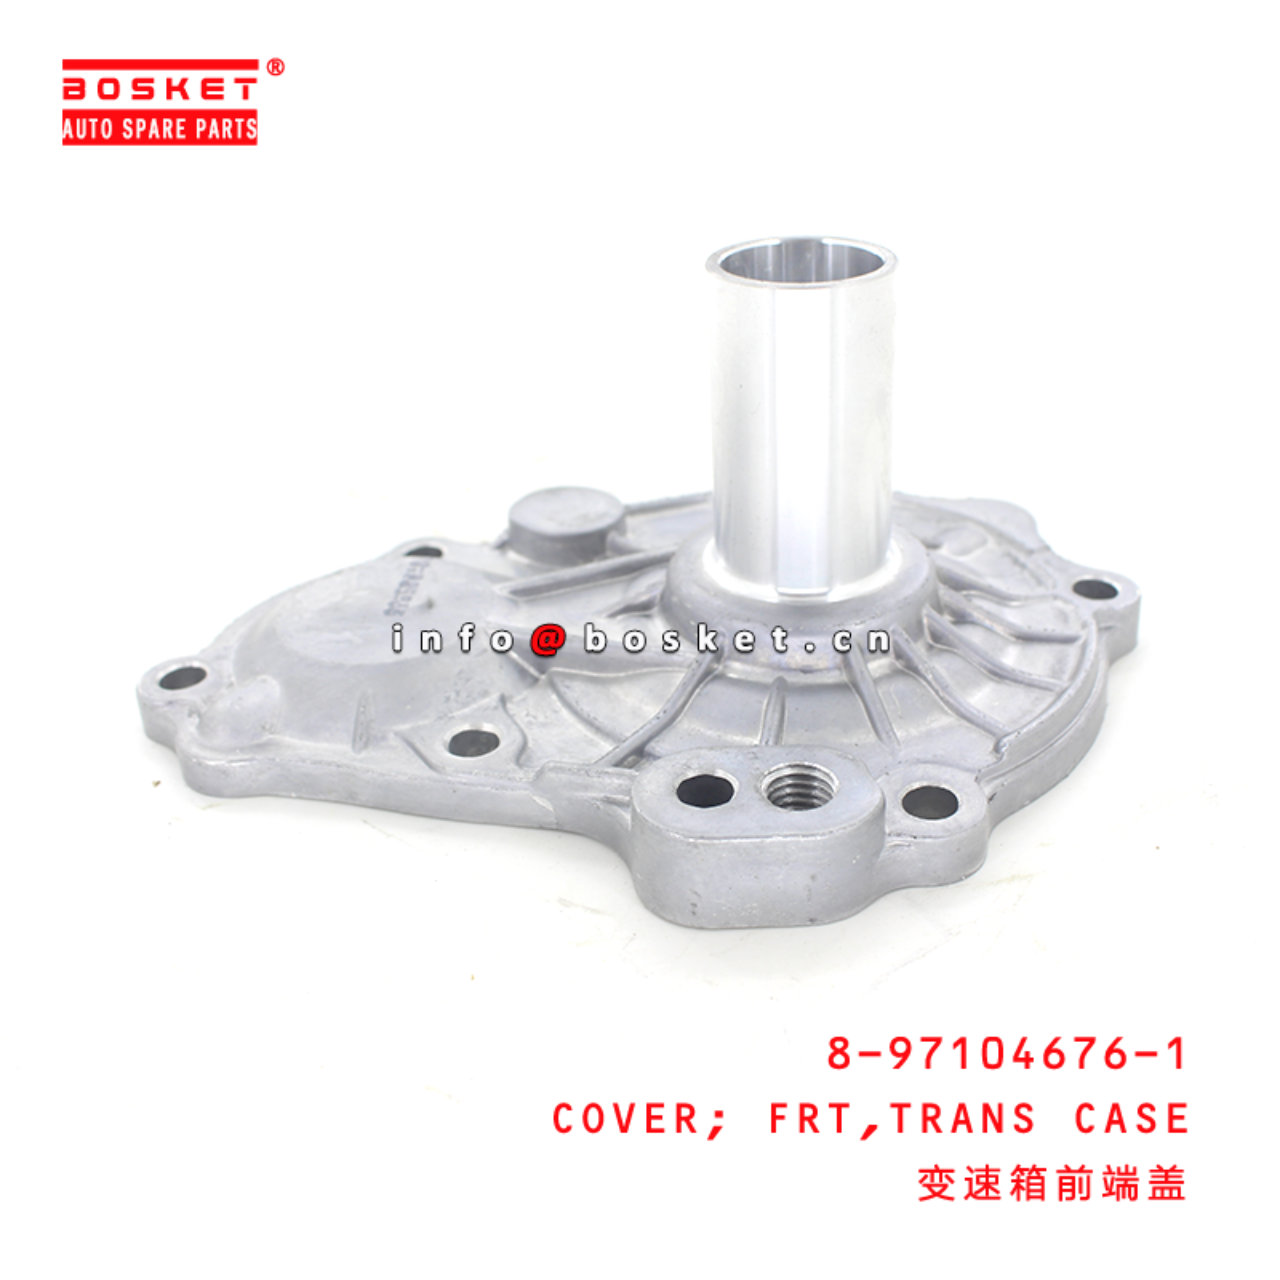  8-97104676-1 Transmission Case Front Cover 8971046761 Suitable for ISUZU TFR55 4JB1